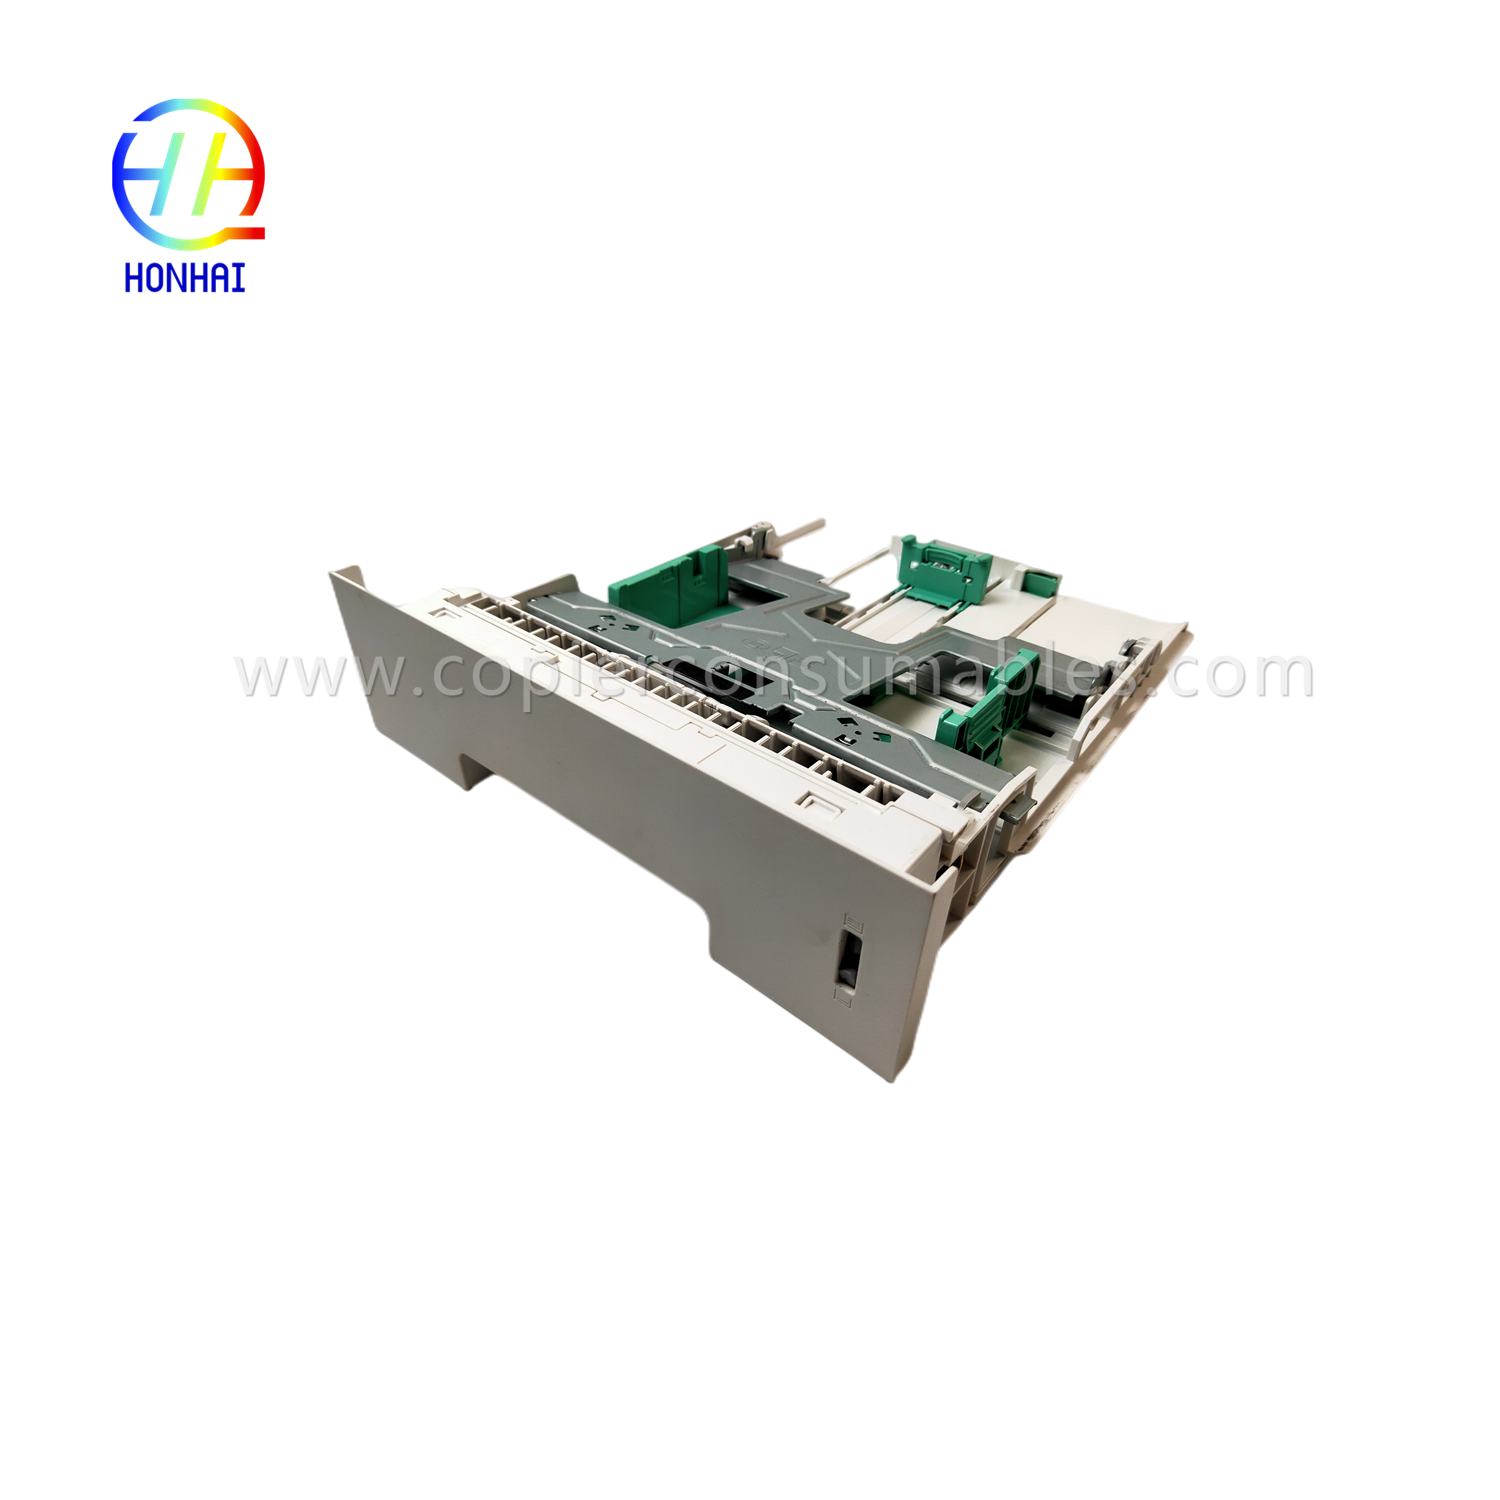 https://www.copierconsumables.com/paper-tray-assembly-for-xerox-phaser-3320dni-workcentre-3315dn-3325dni-050n00650-cassette-paper-tray-product/